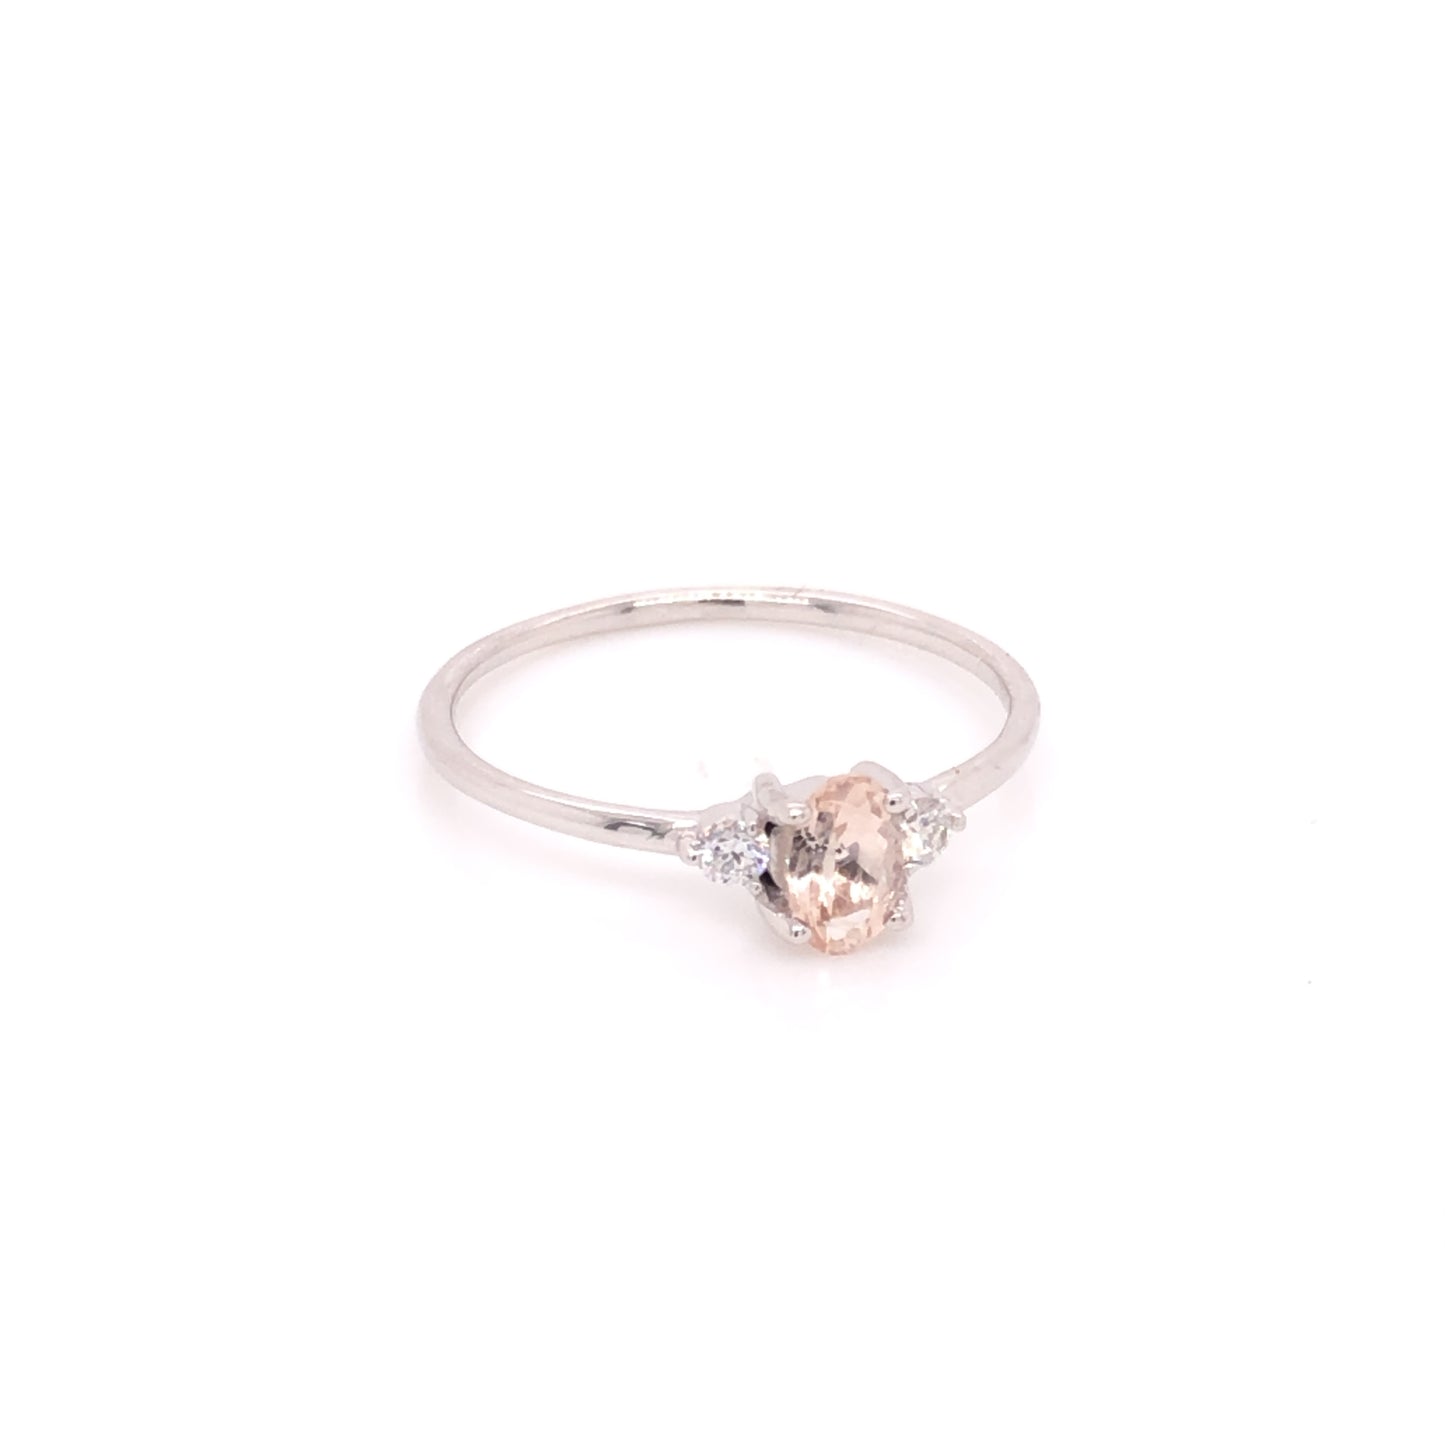 IMMEDIATE DELIVERY / Angie Ring with Morganite / 14k White Gold / Size 4.5